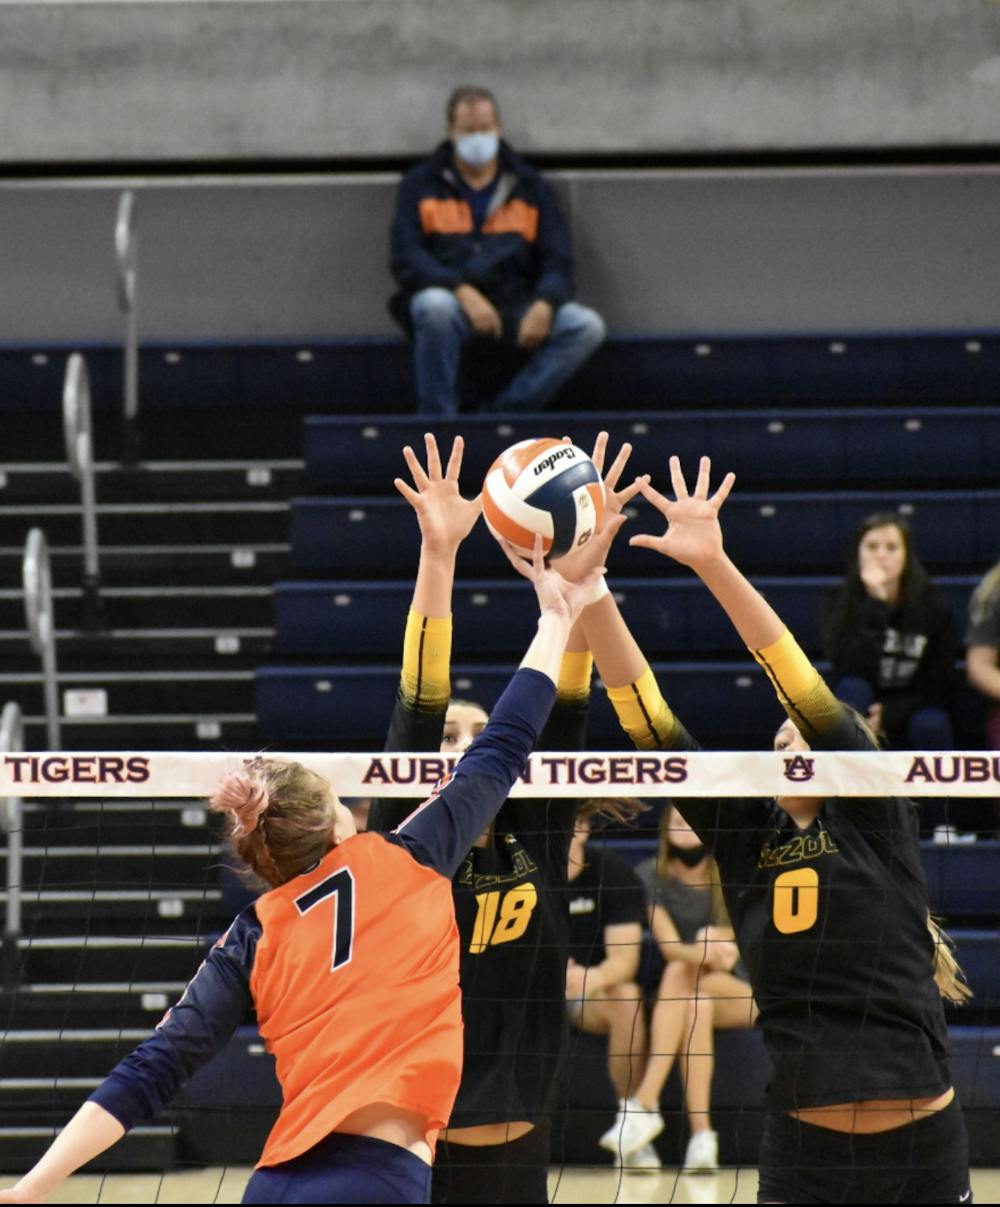 <p>Oct. 16, 2021; Auburn, AL, USA; Rebekah Rath (7) contorts the ball off of her hand in match between Auburn and Missouri in the Auburn Arena.</p>